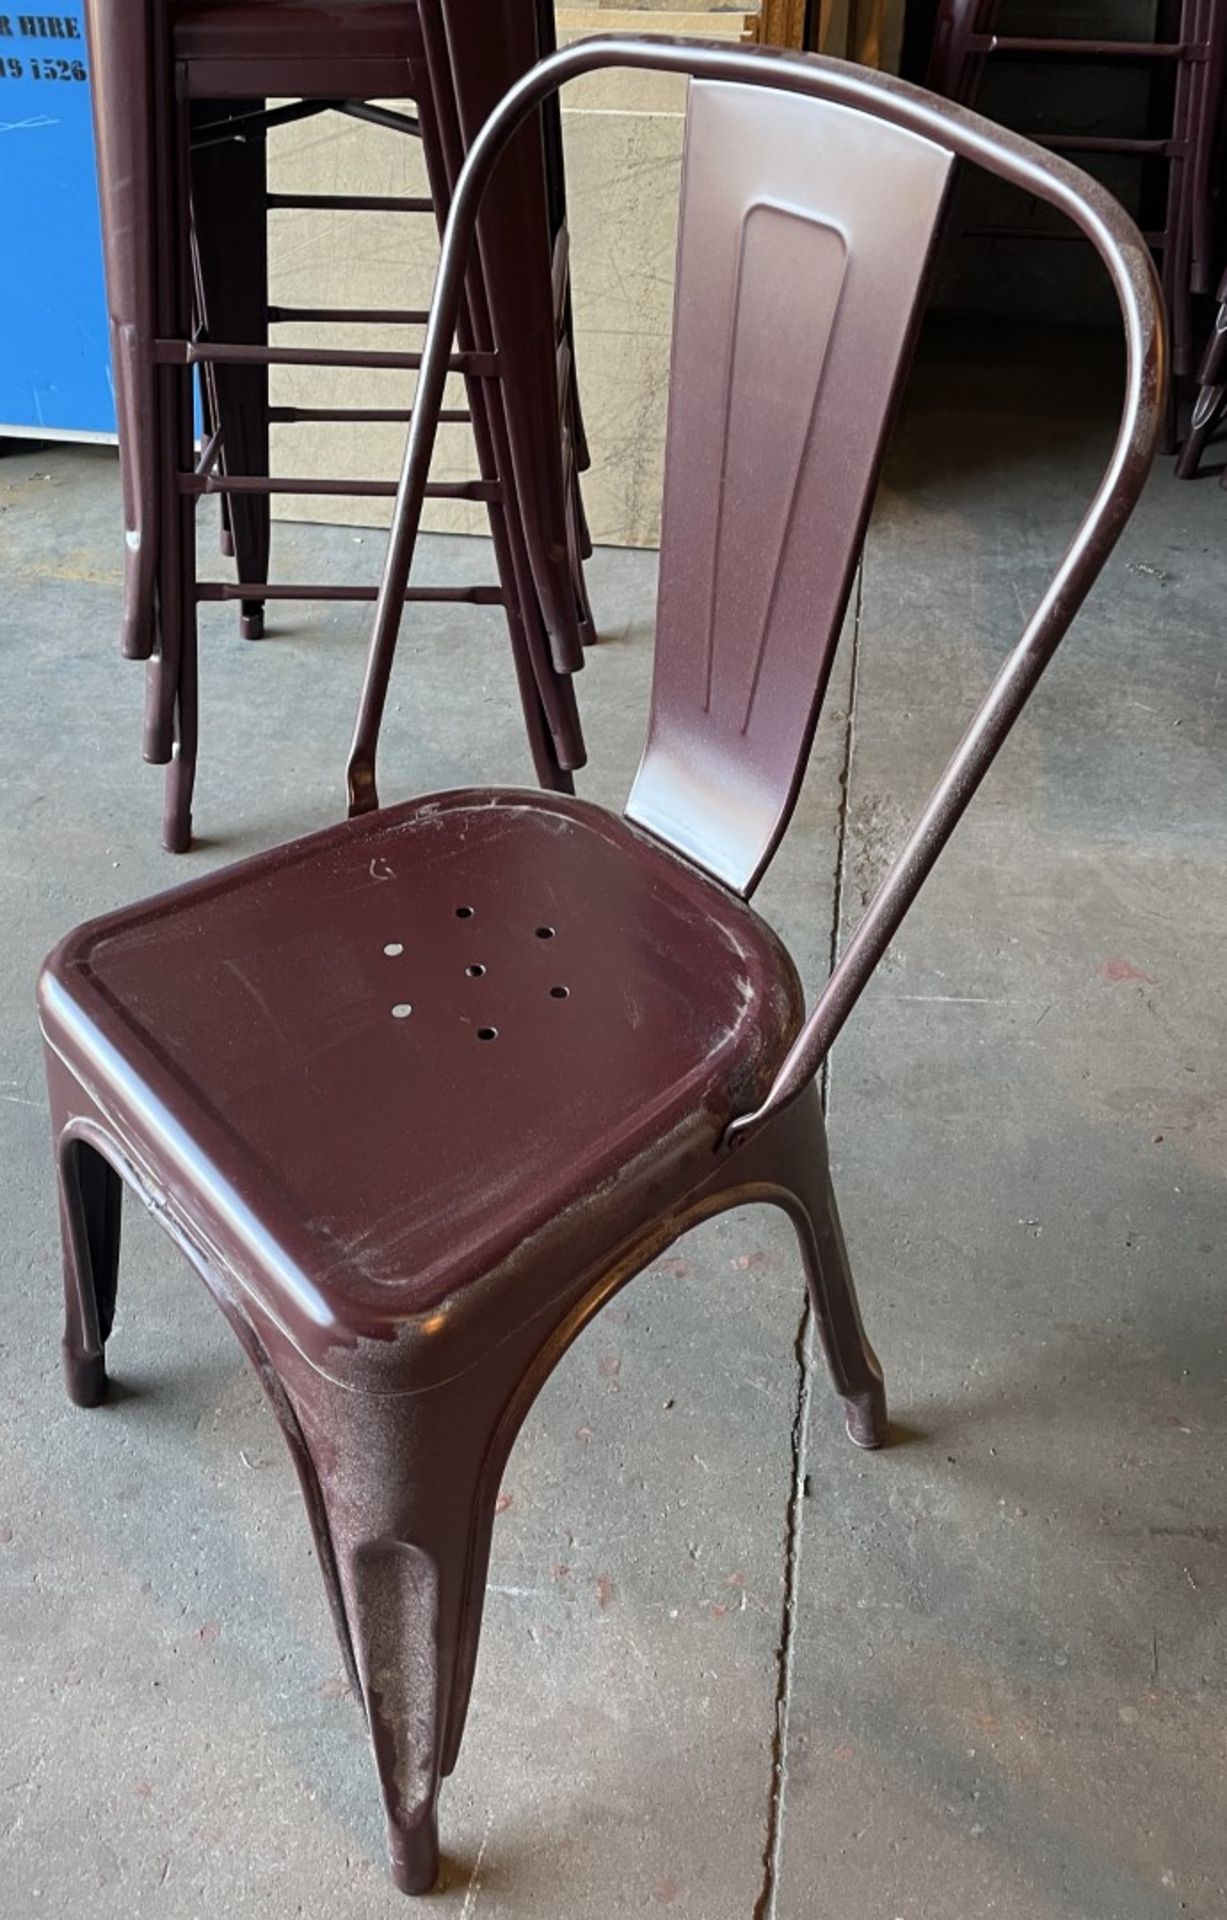 12 x Commercial Outdoor Metal Bistro Chairs - Ref: FGN069A - CL834 - Location: Essex, RM19This lot w - Image 6 of 8